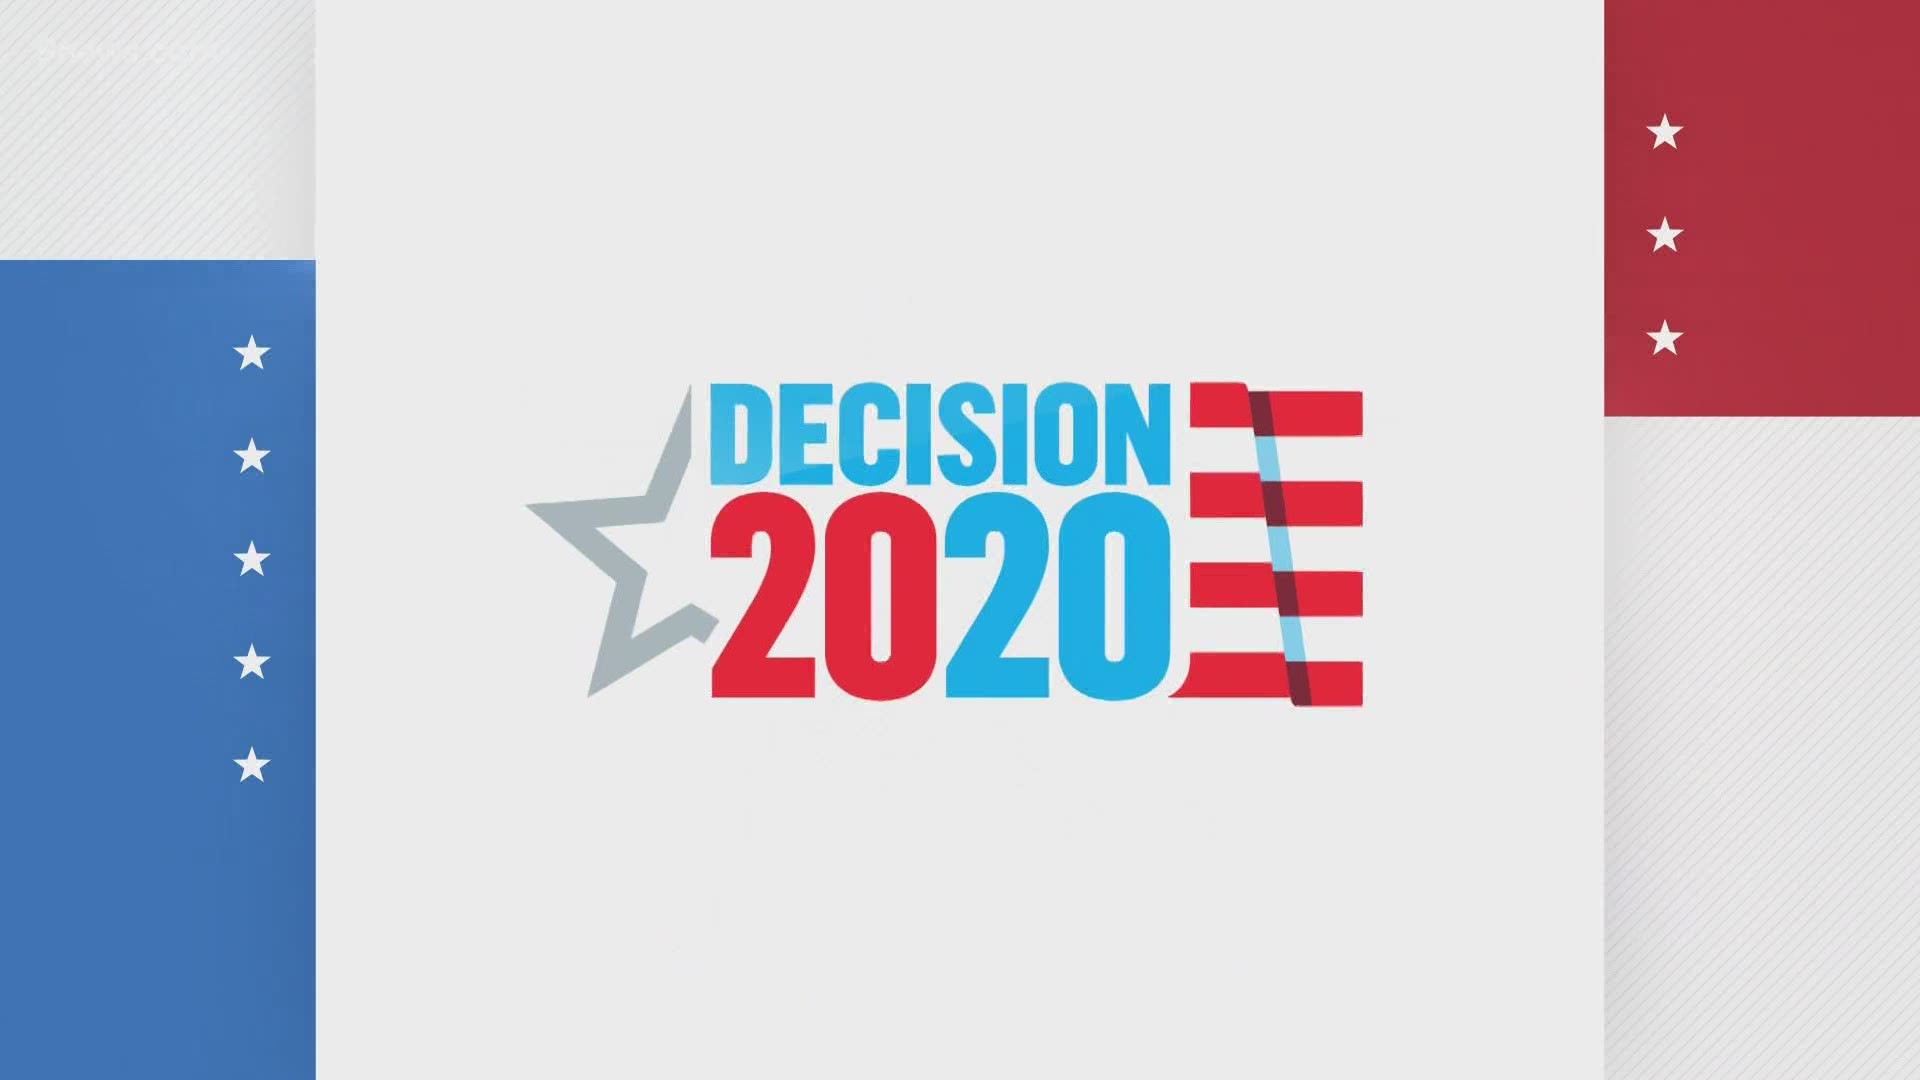 9NEWS political experts, Democrat James Mejia and Republican Kelly Maher, discuss the results from Colorado's 2020 primary election.